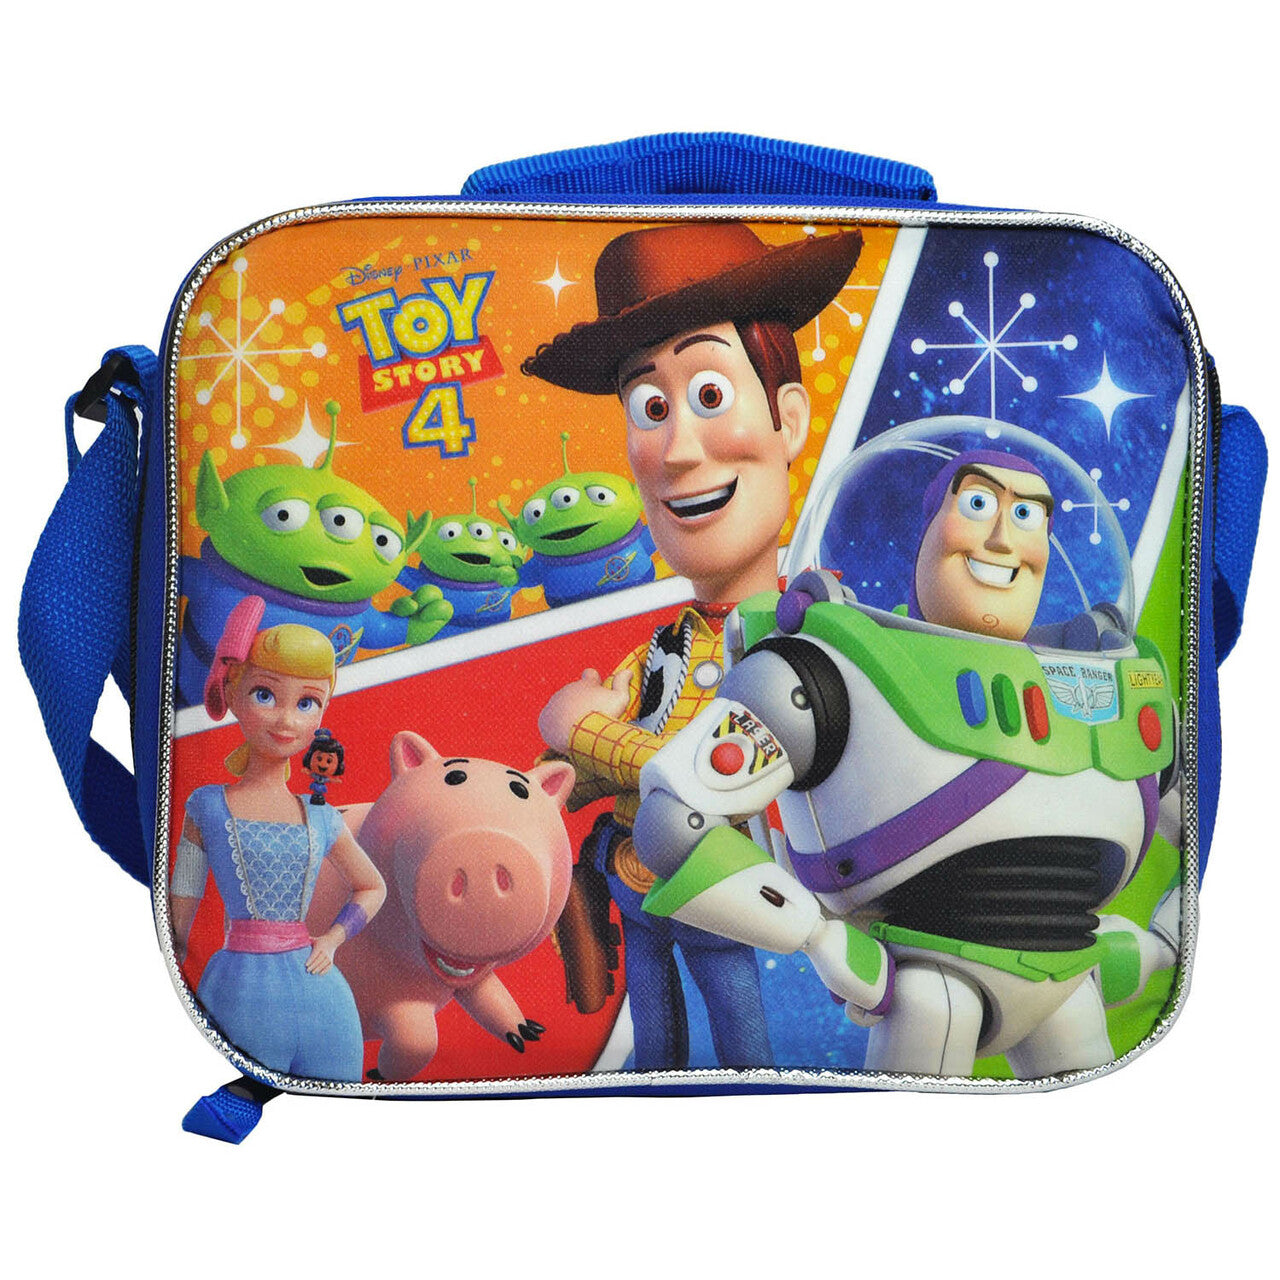 Disney Pixar Toy Story 4 Movie Insulated Soft Lunch Bag